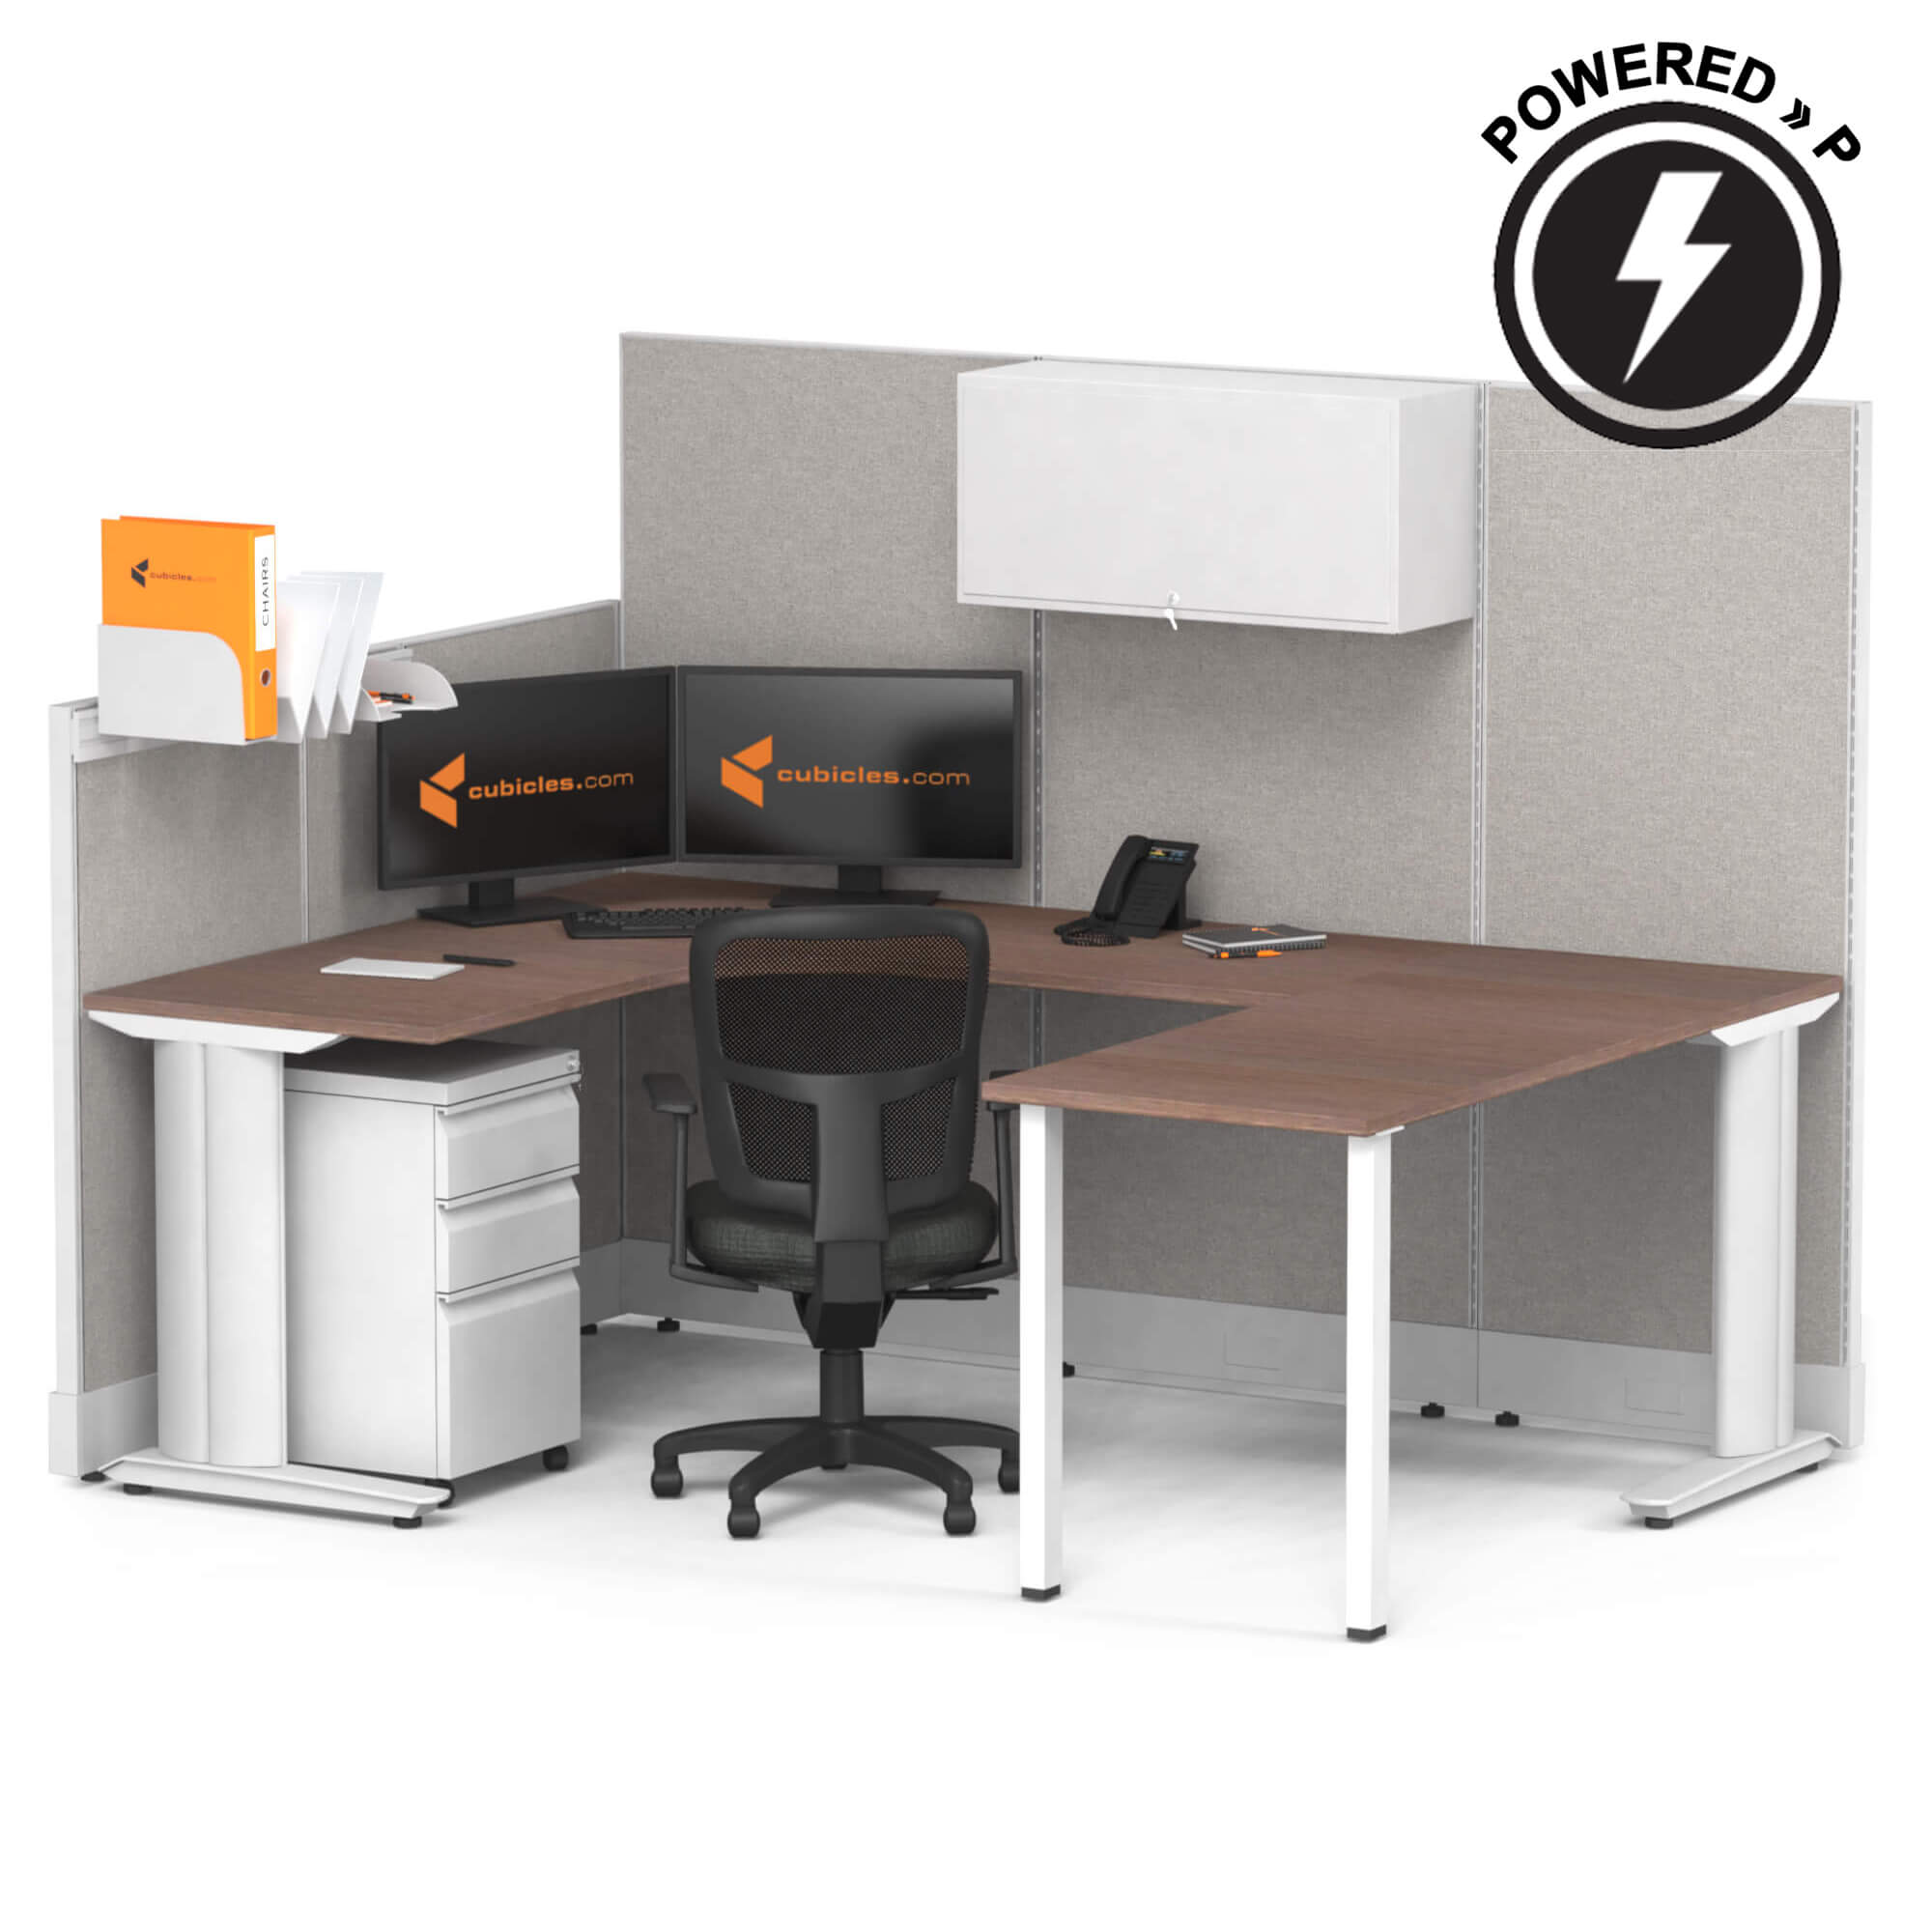 Cubicle desk u shaped with storage 1pack powered sign